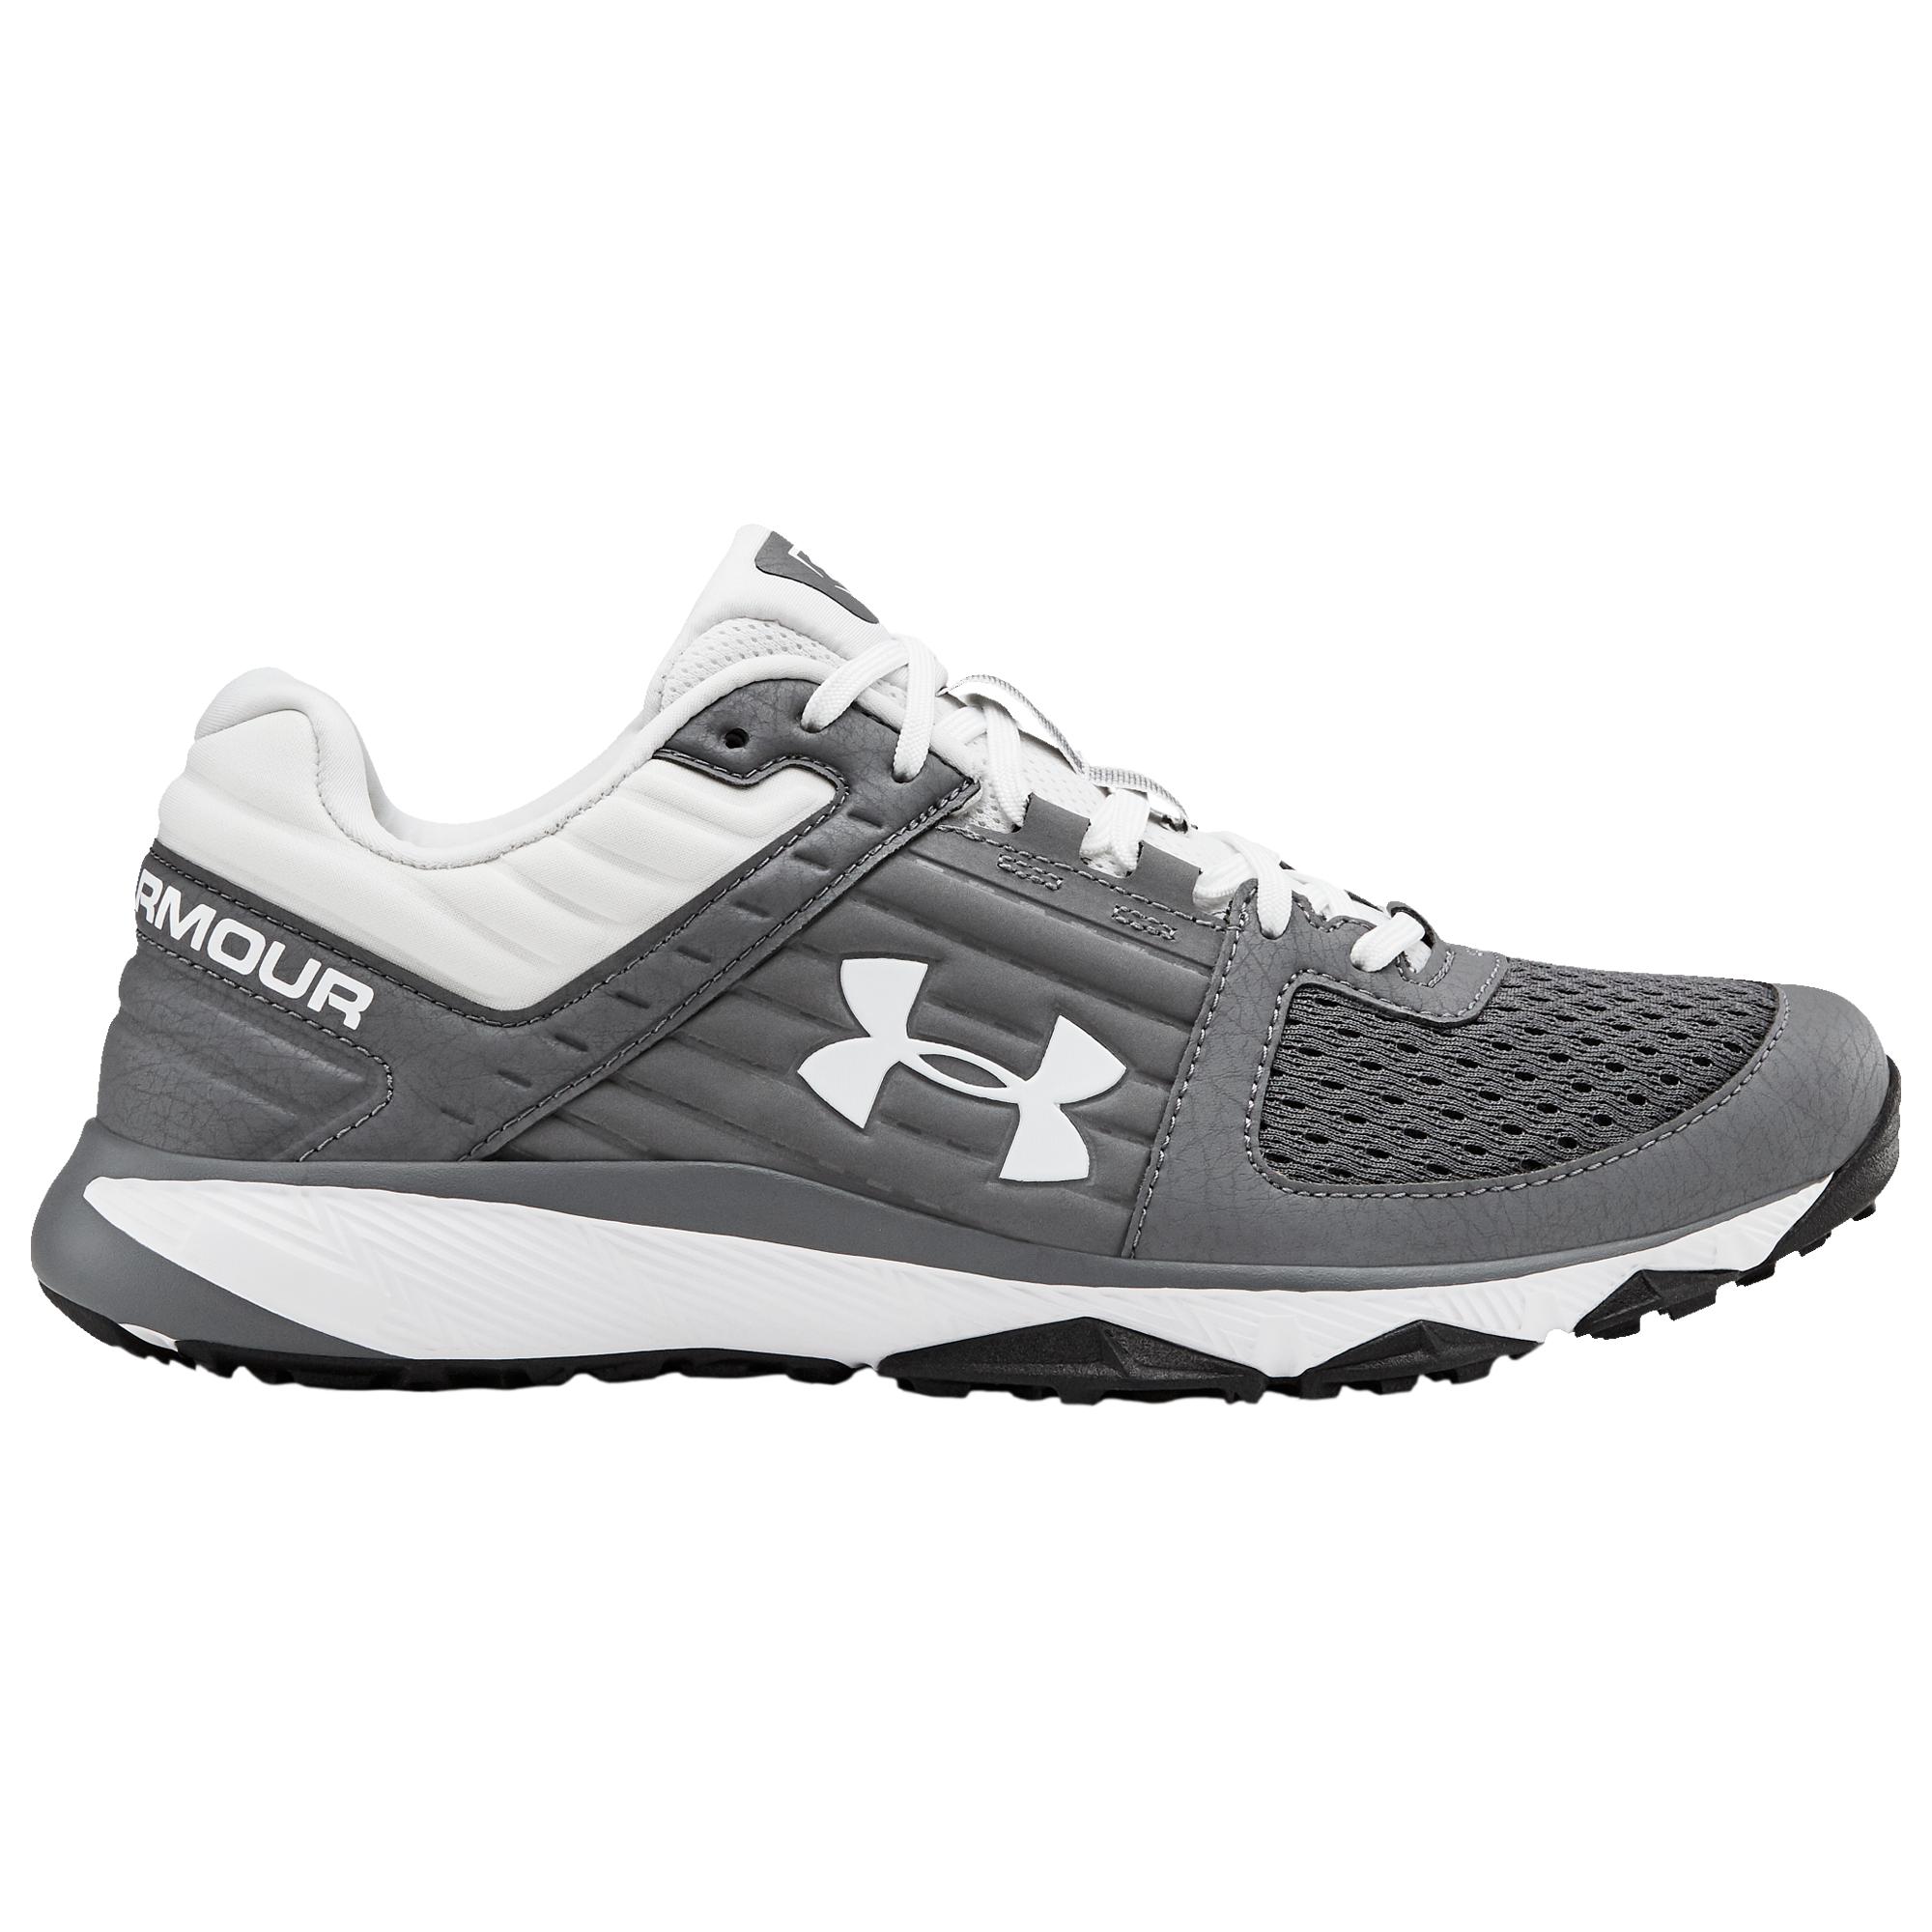 Under Armour Synthetic Yard Trainer Turf Shoes in Graphite/White (White)  for Men - Lyst